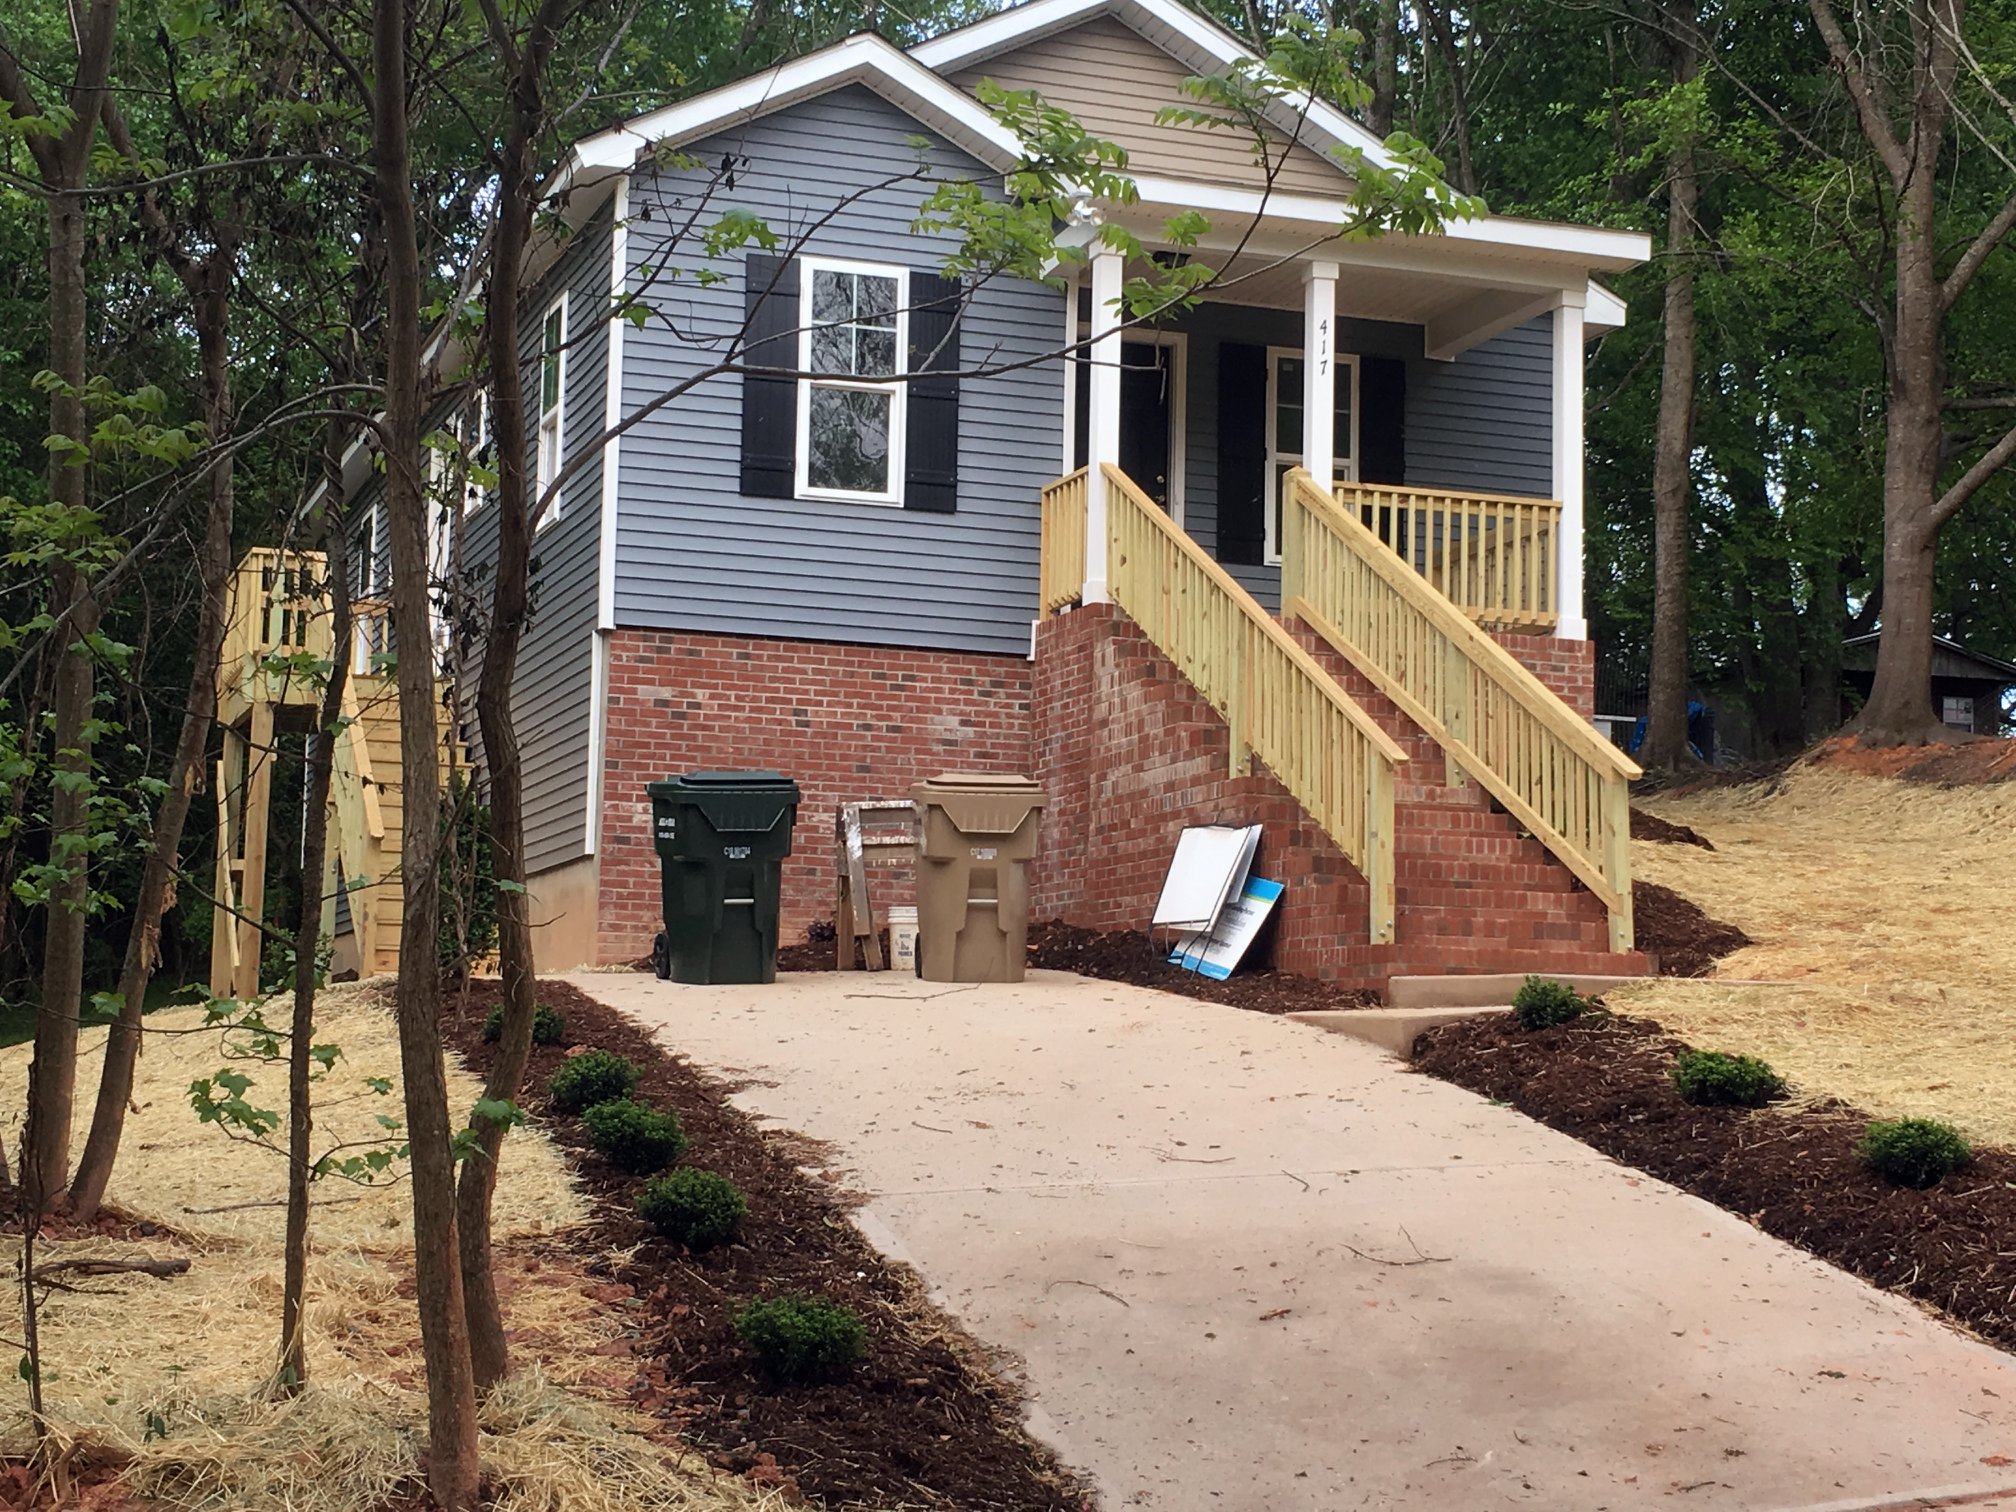 Habitat For Humanity Service Project House Completed March 2018